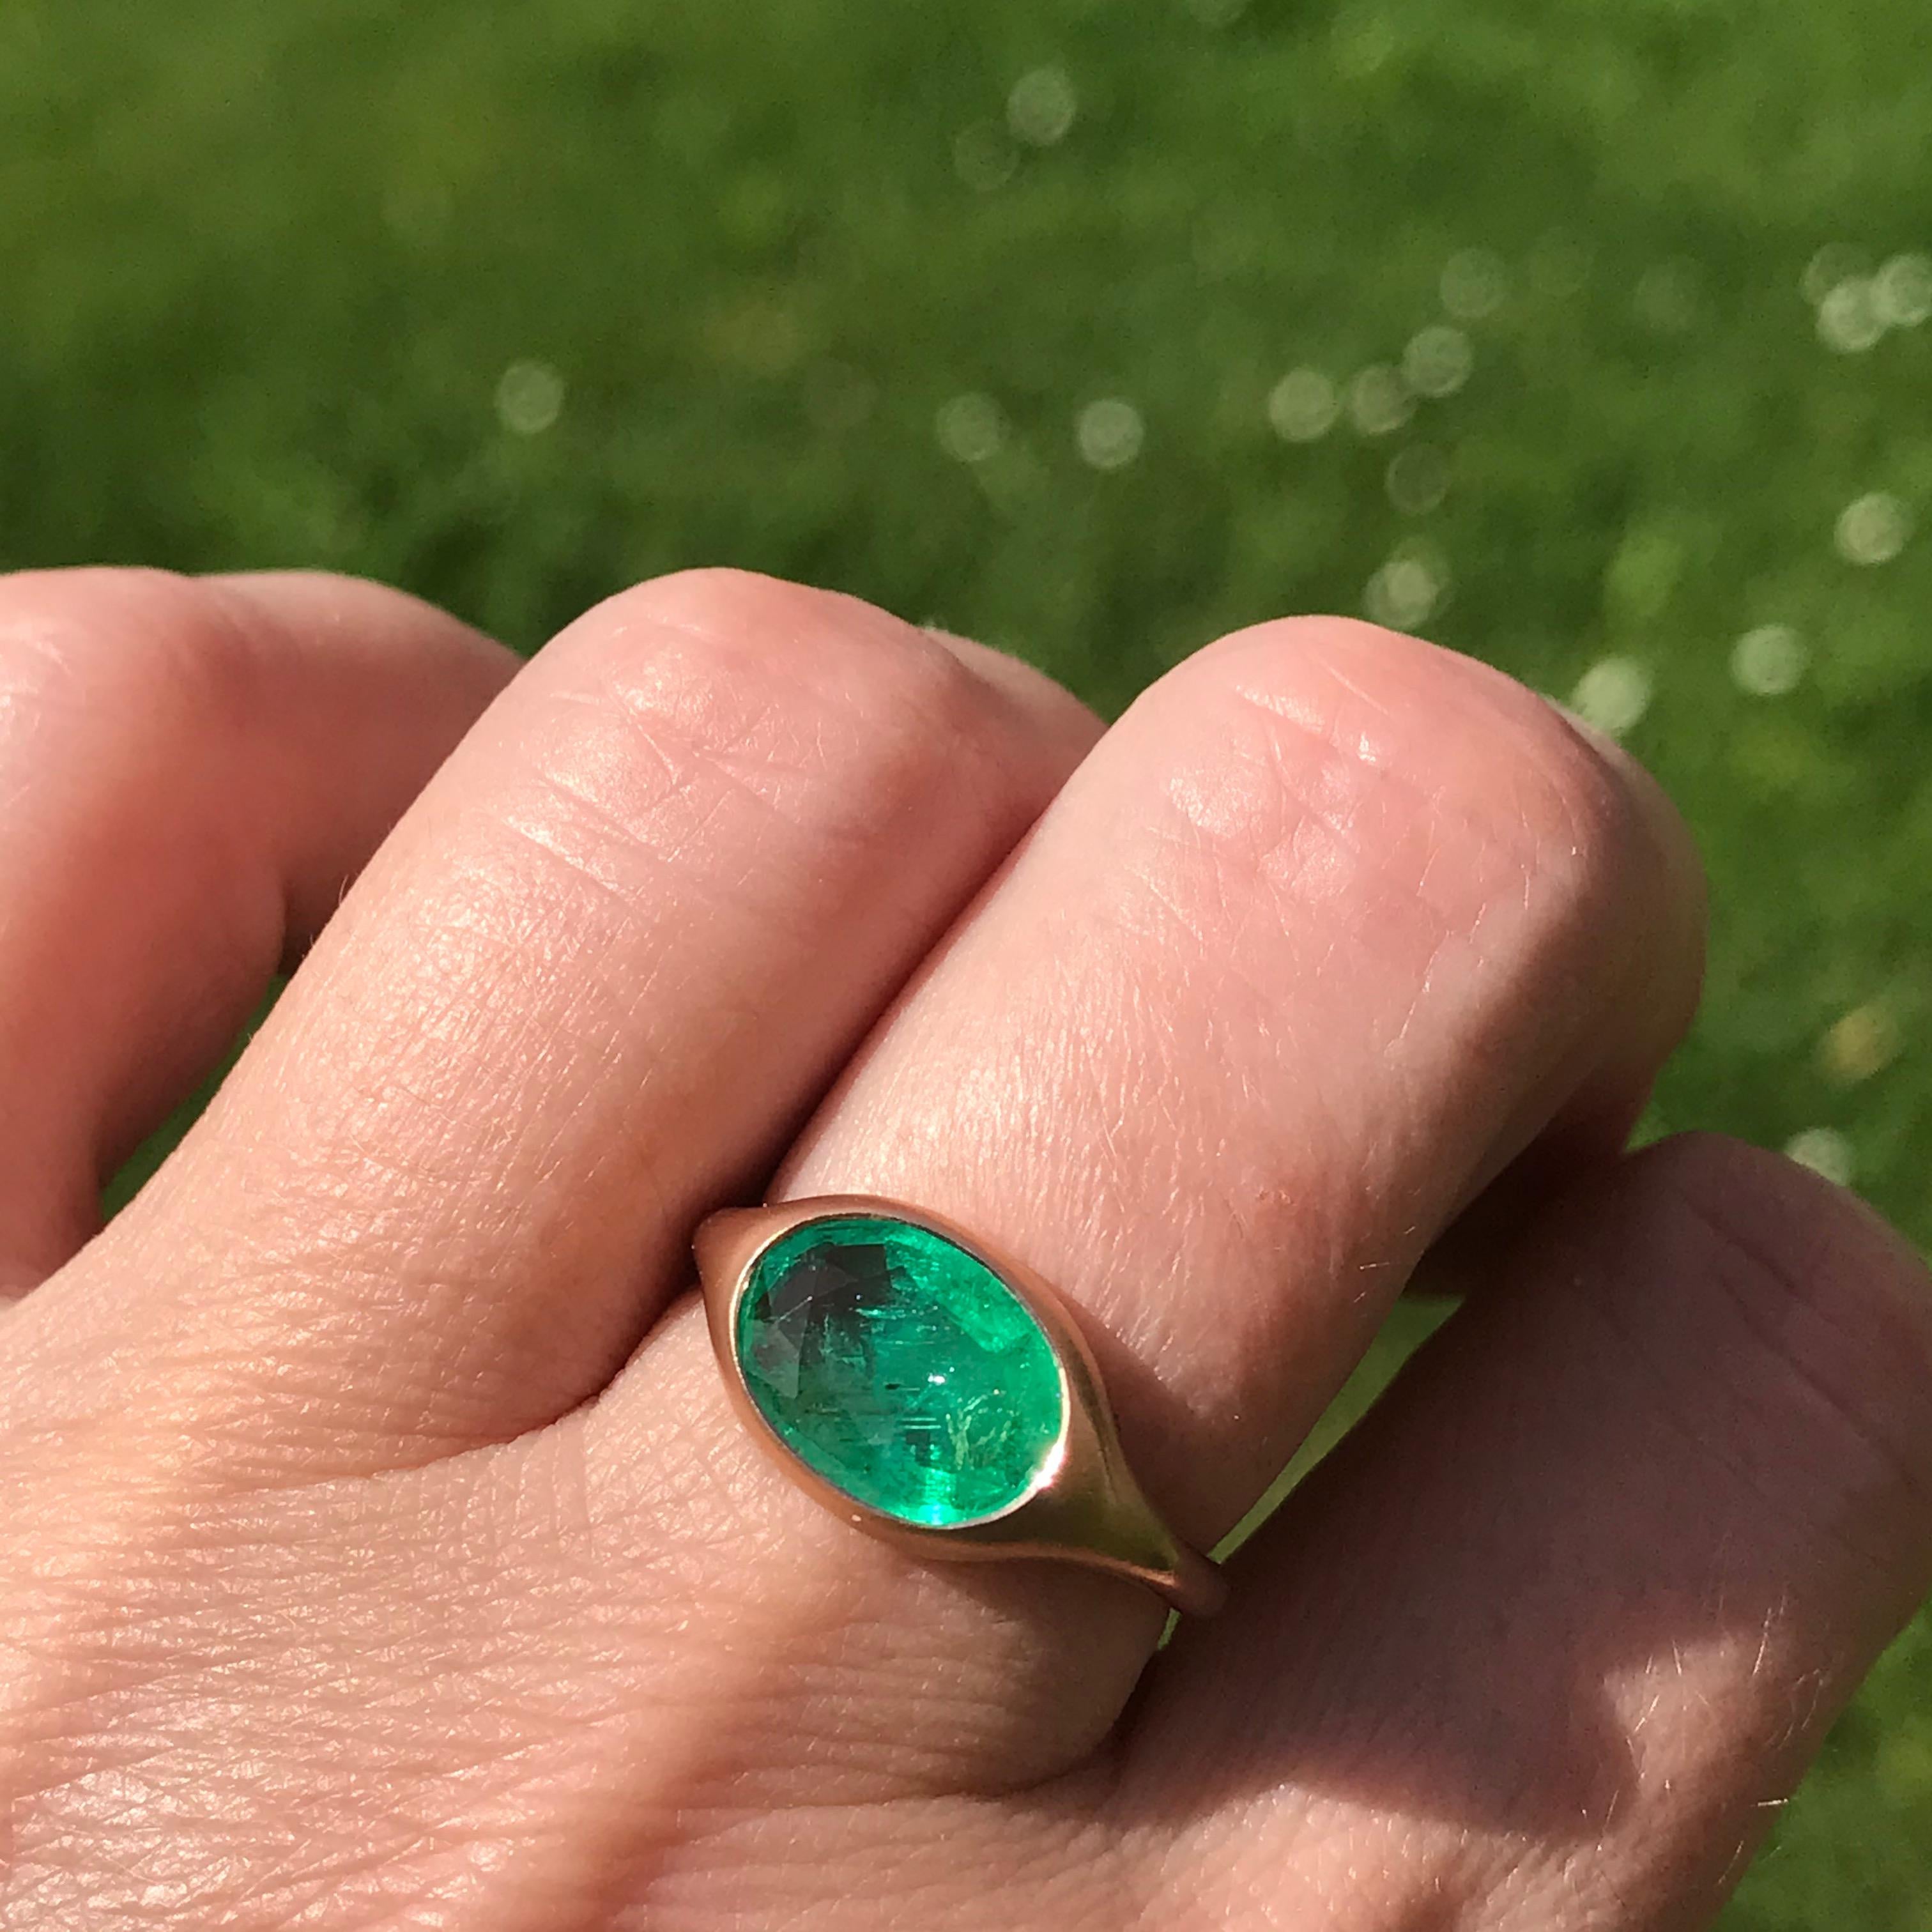 Dalben design One of a Kind 18k rose gold matte finishing ring with a light green 2,16 carat bezel-set oval faceted cut emerald. 
Ring size 7 1/4 USA - EU 55 re-sizable to most finger sizes. 
Bezel stone dimensions :
height 9,5 mm
width 14 mm
The